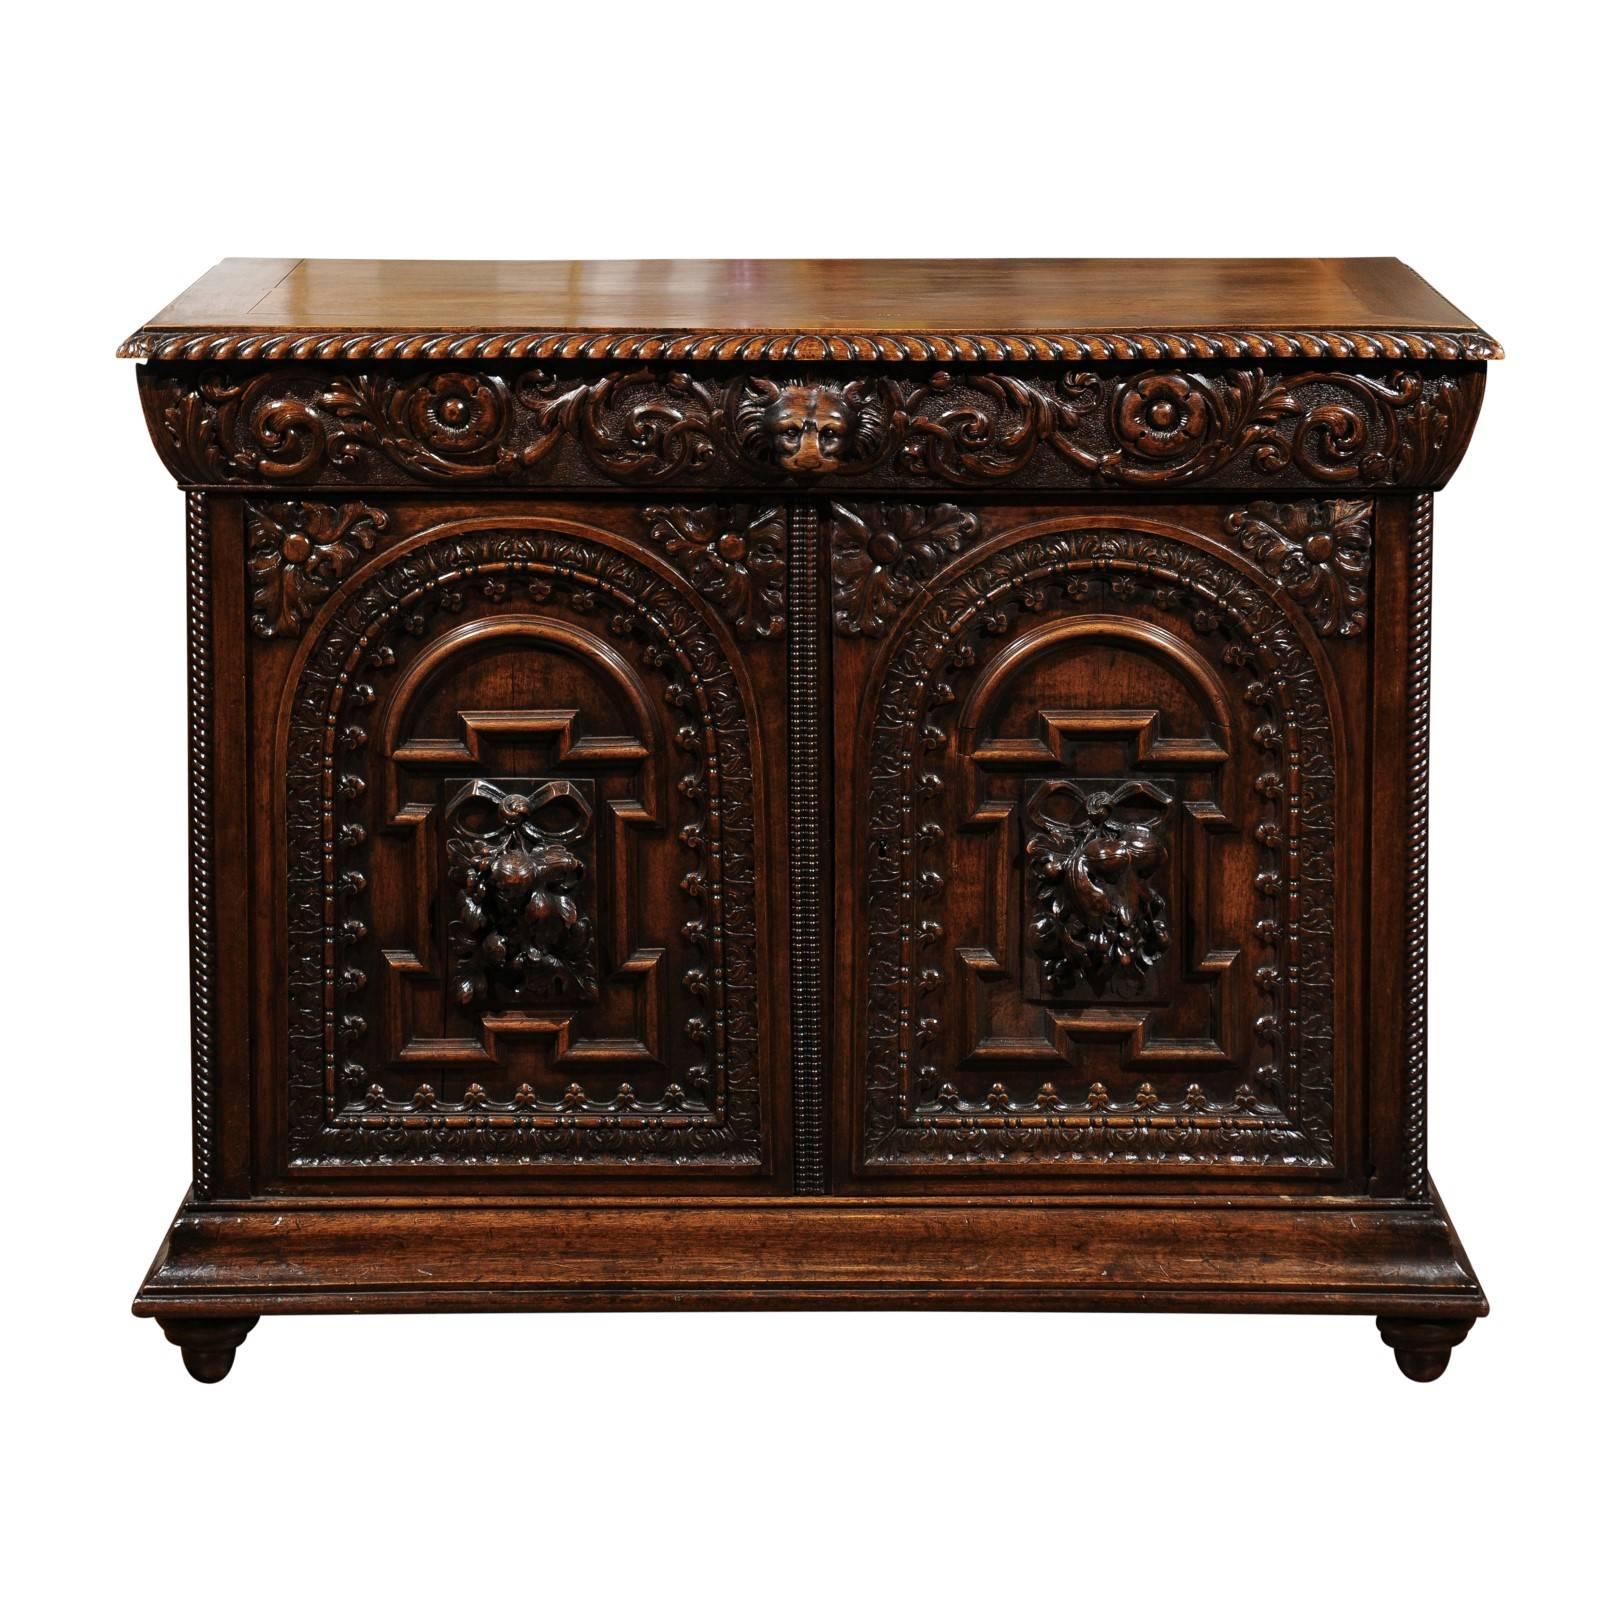 French Renaissance Revival Richly Carved Two-Door Credenza from the 1850s